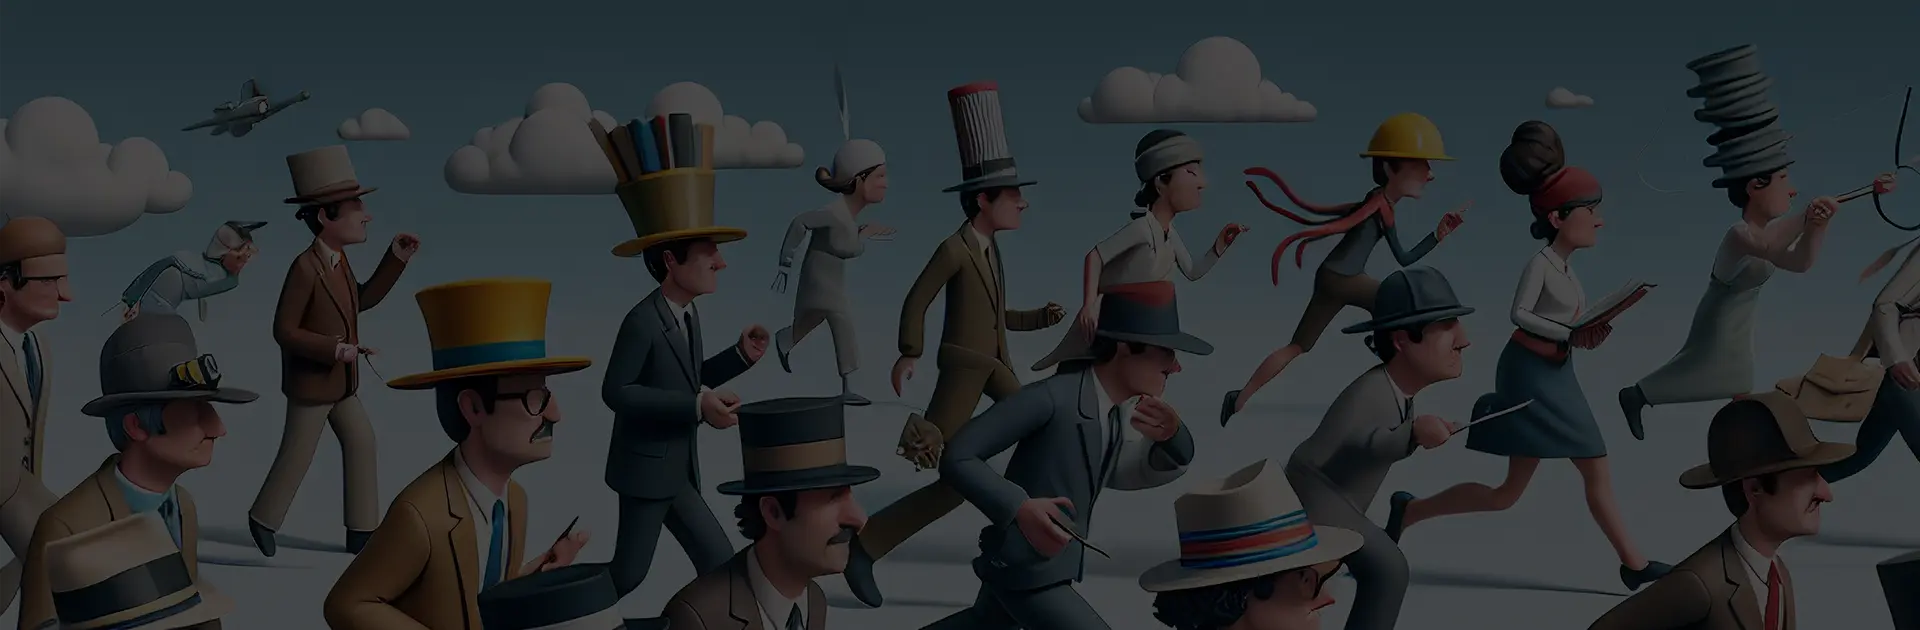 Animated characters in various hats running around